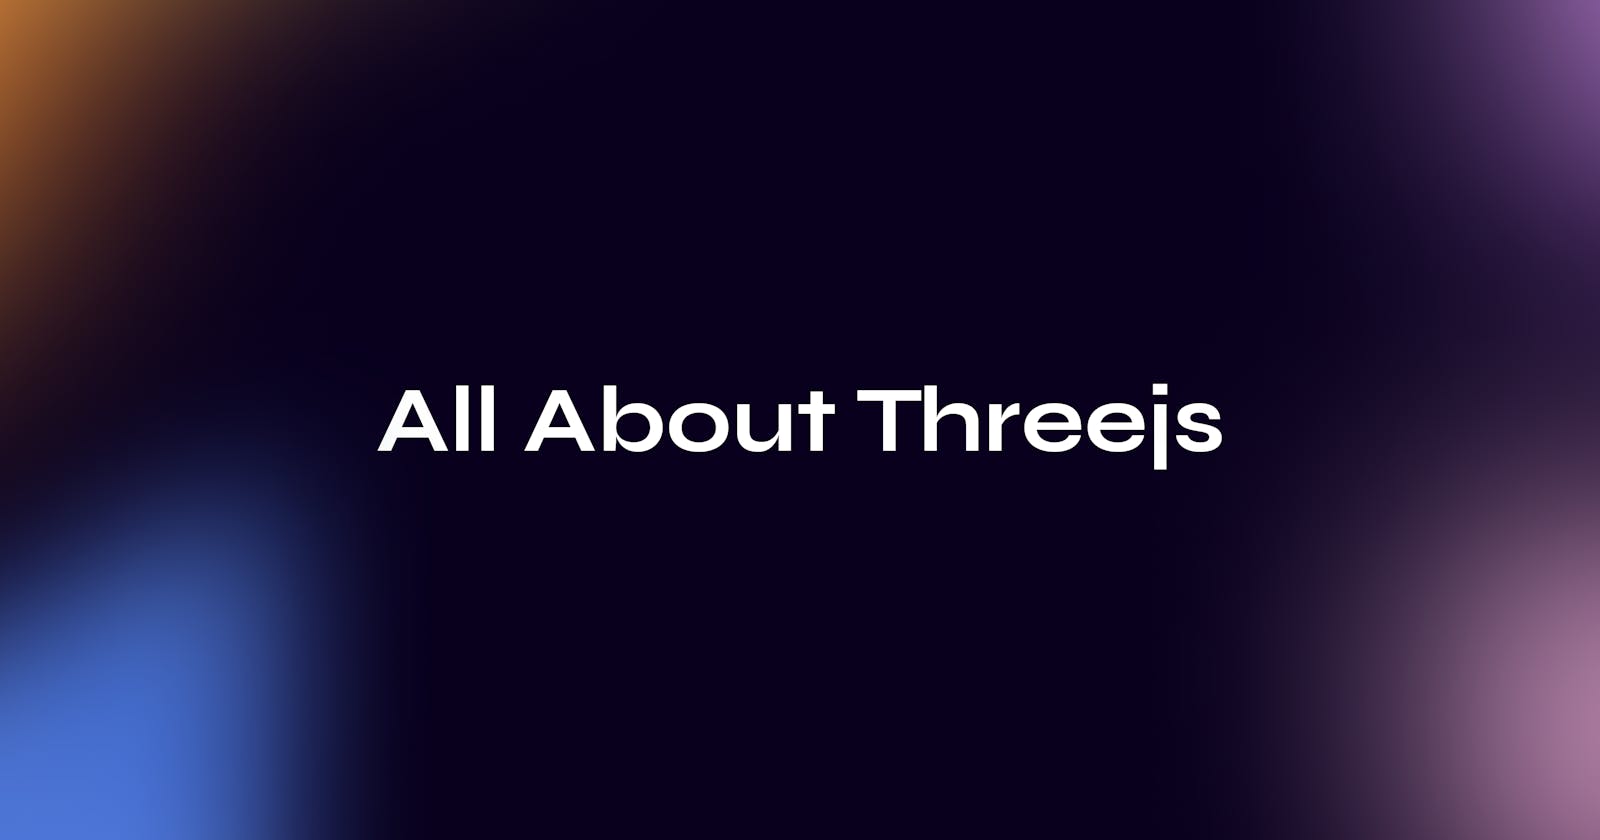 All About Threejs